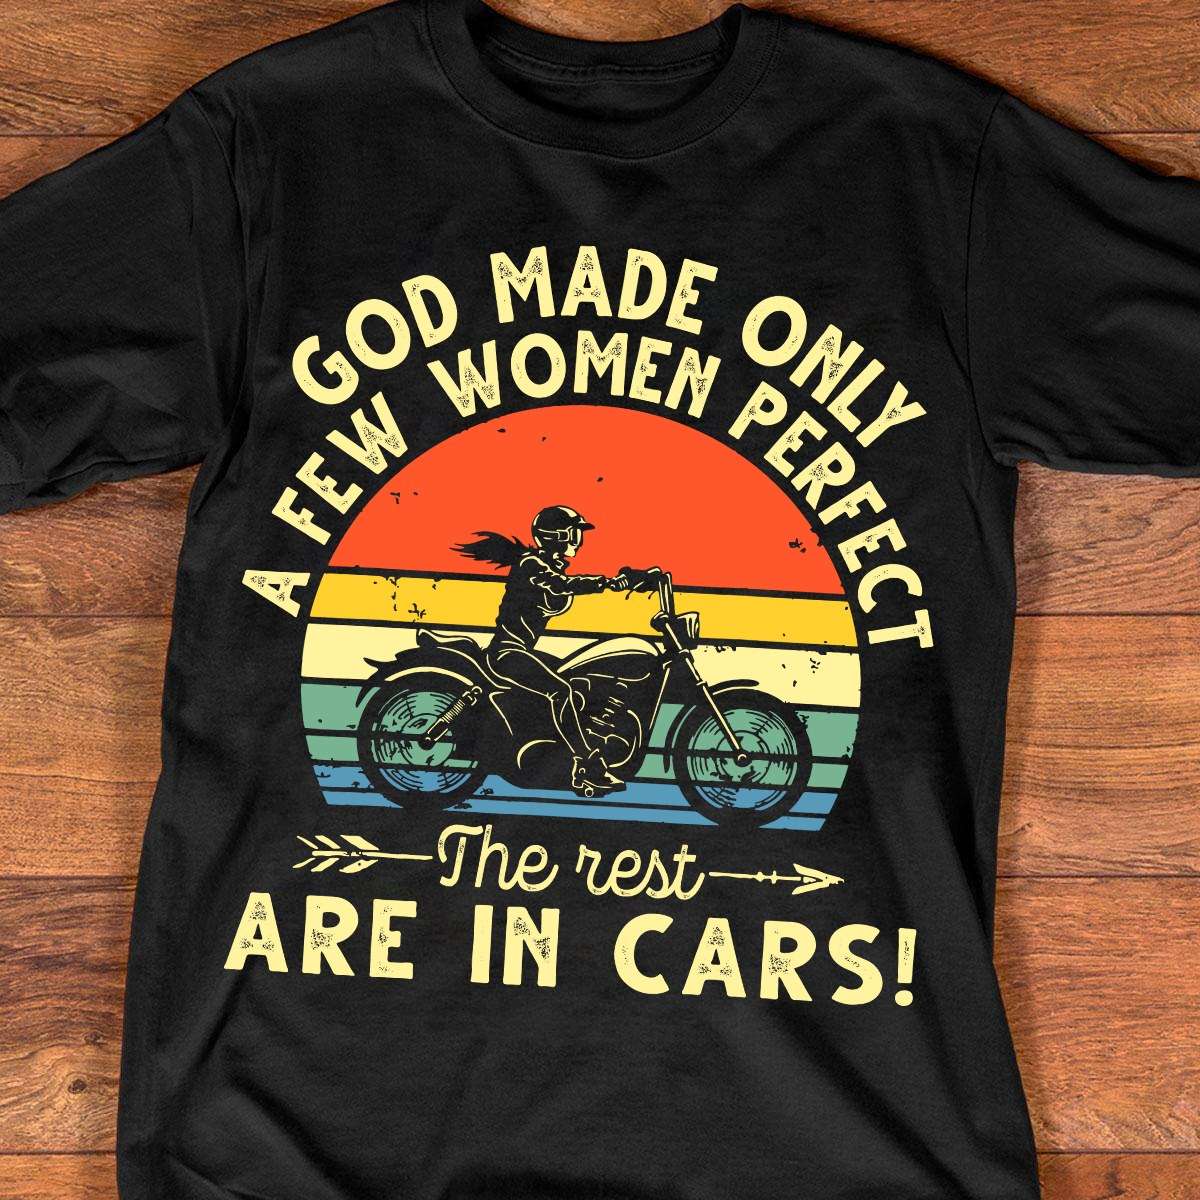 God made only a few women perfect, the rest are in cars - Women dope biker